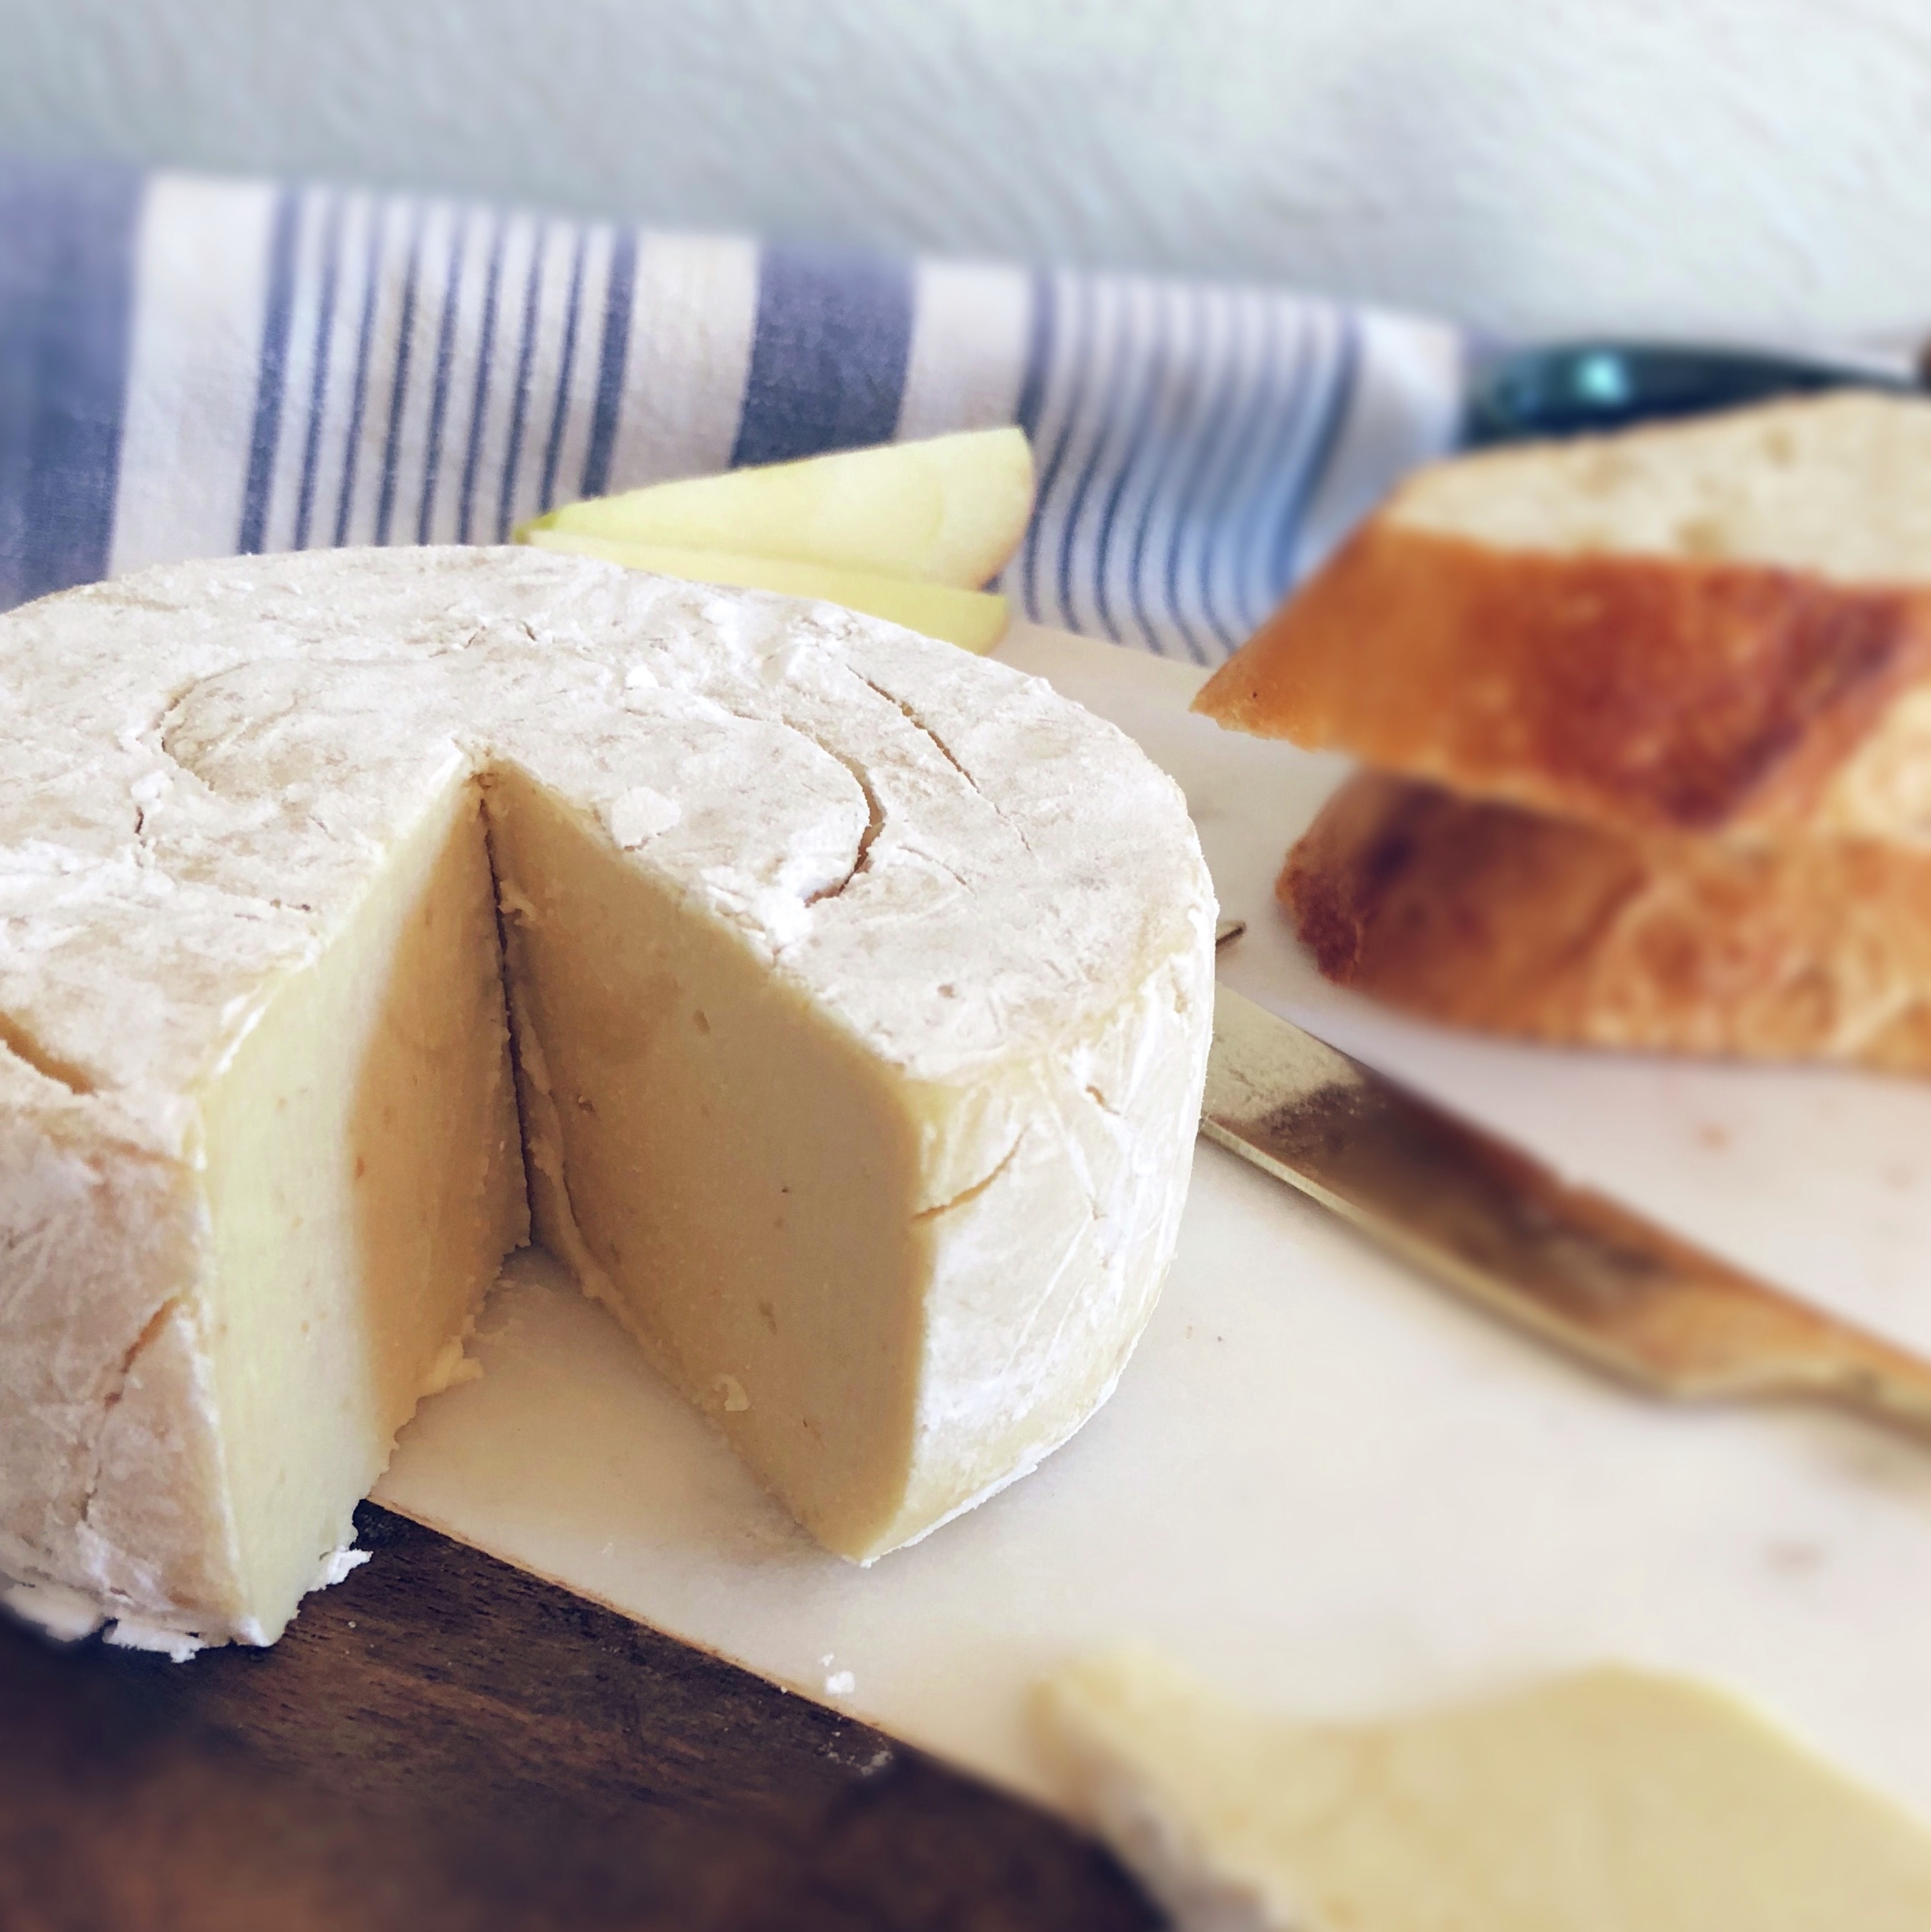 Chronicles of a vegan cheese making challenge